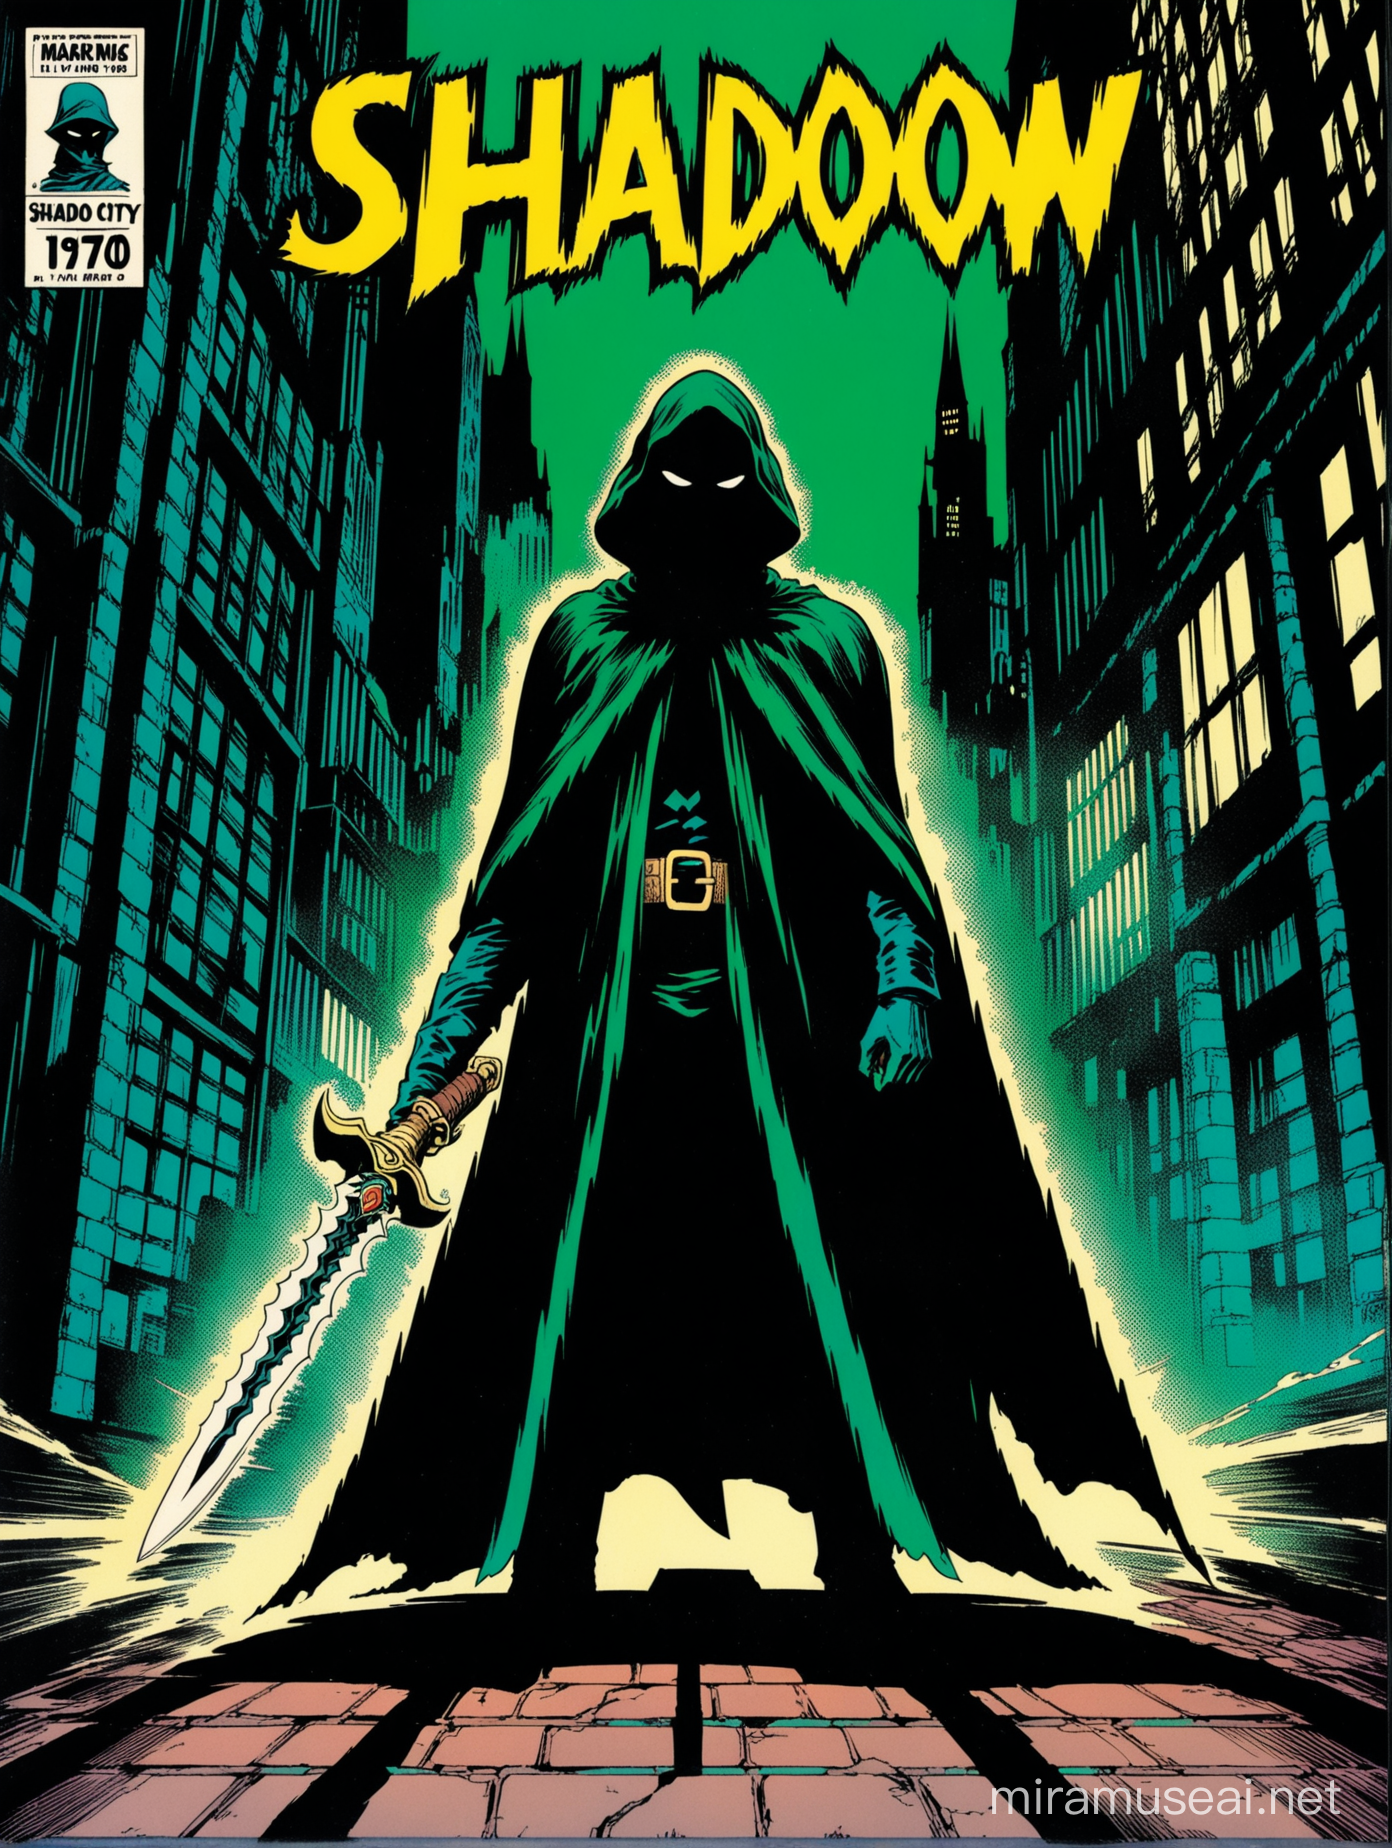 cloaked figure holding dagger the shadow dark city scene 1970s comic book cover style